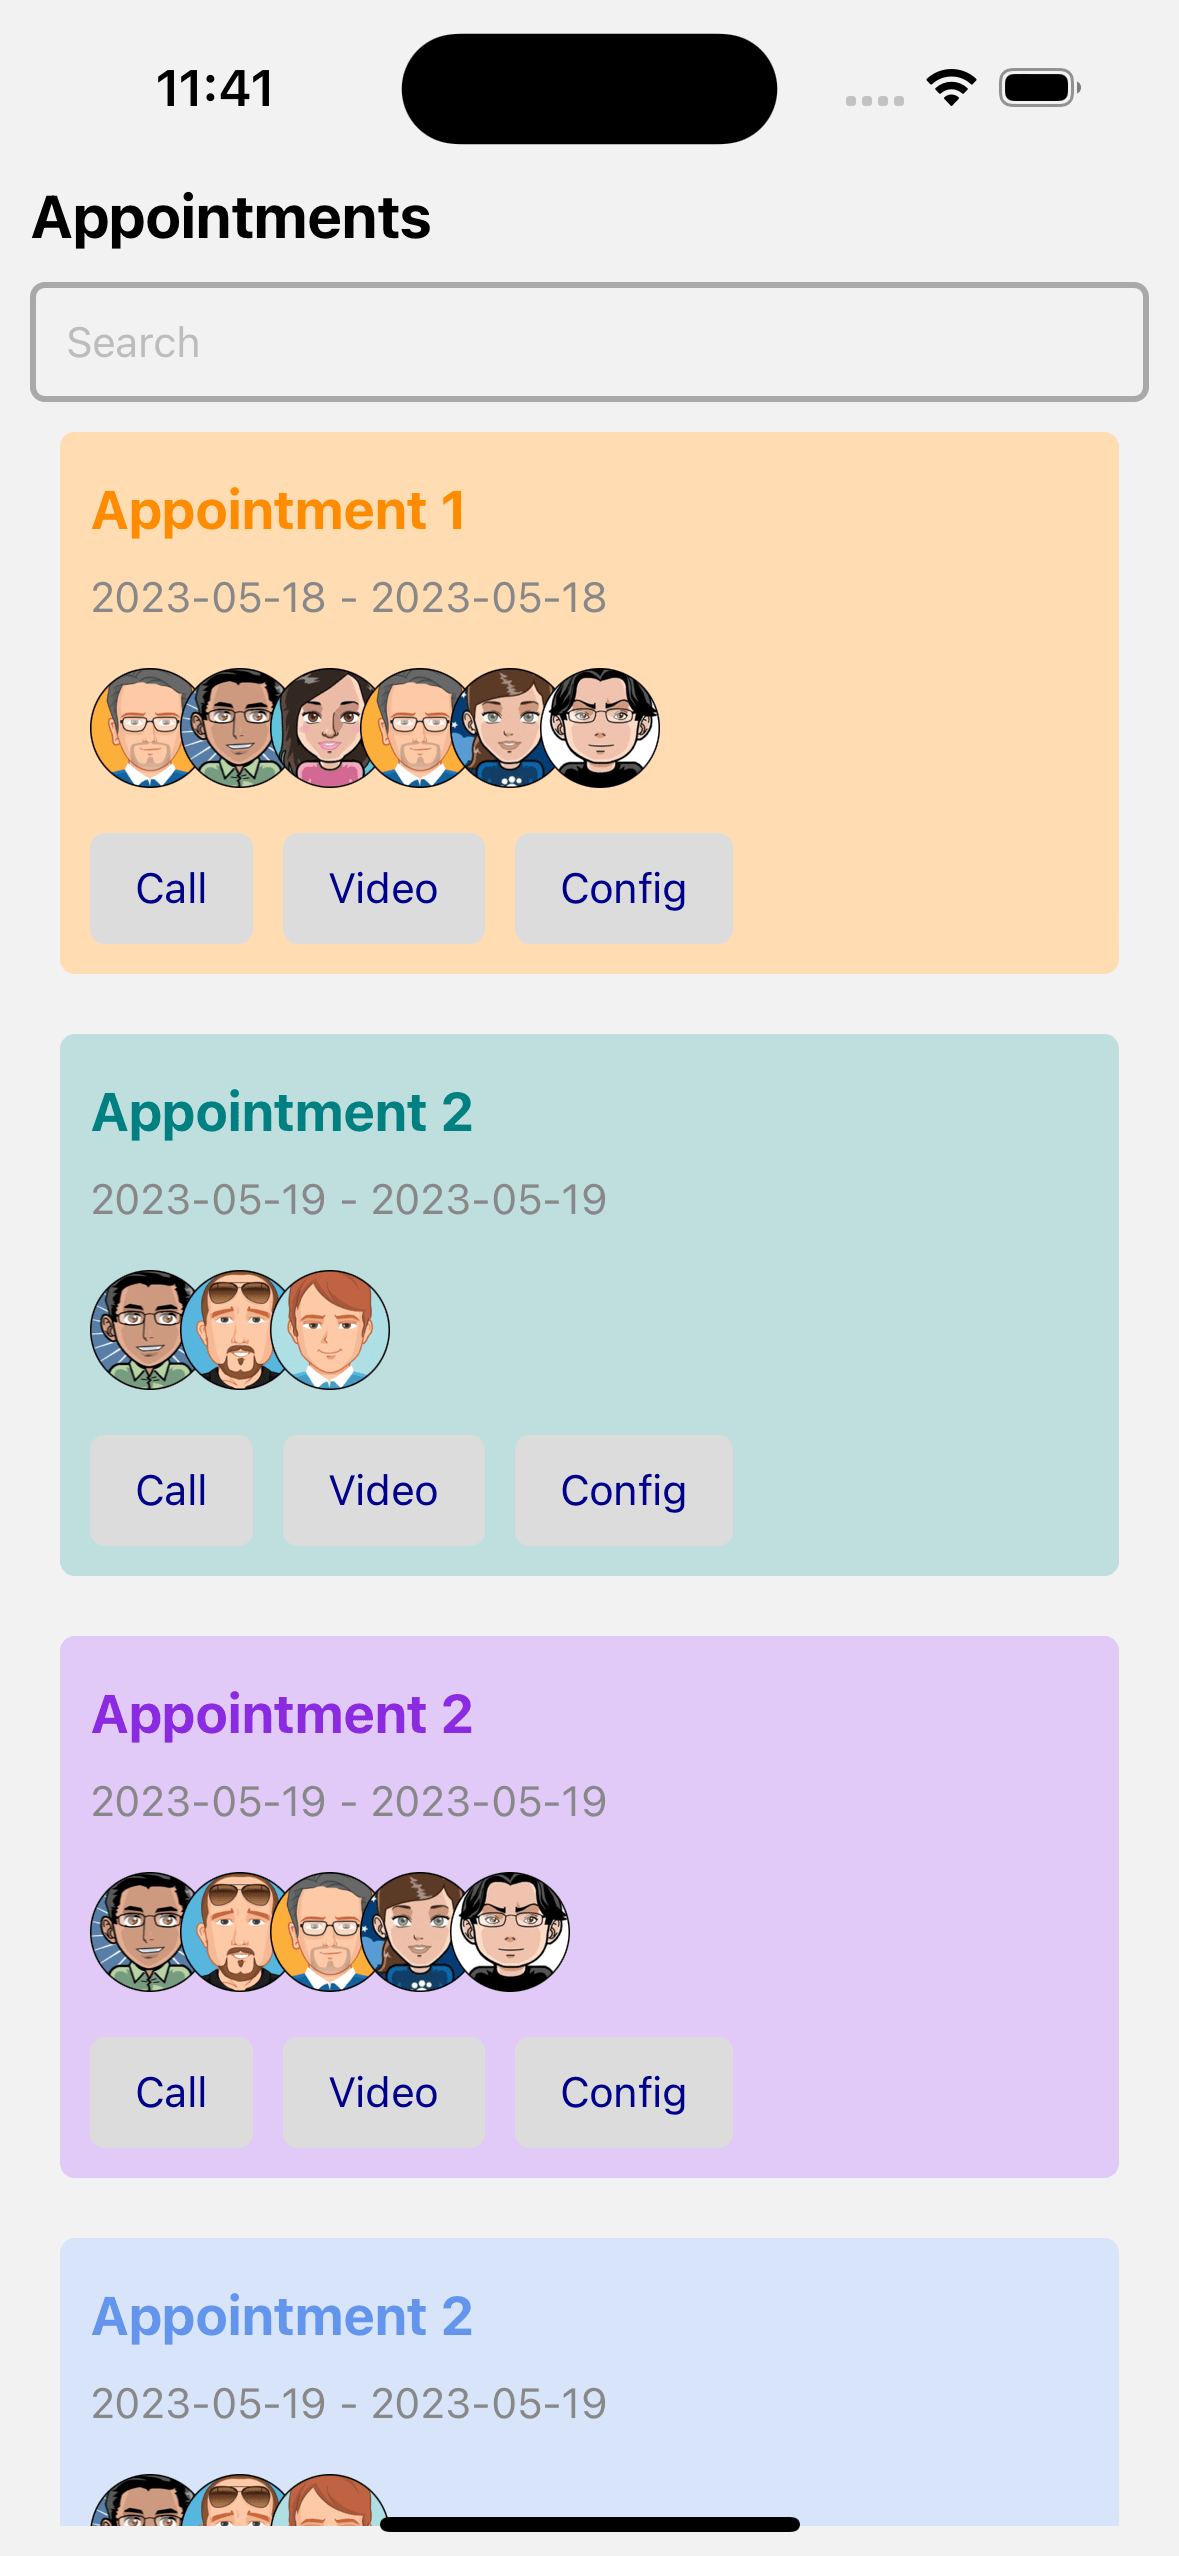 React native template. appointment list with title, dates, attendees and action buttons